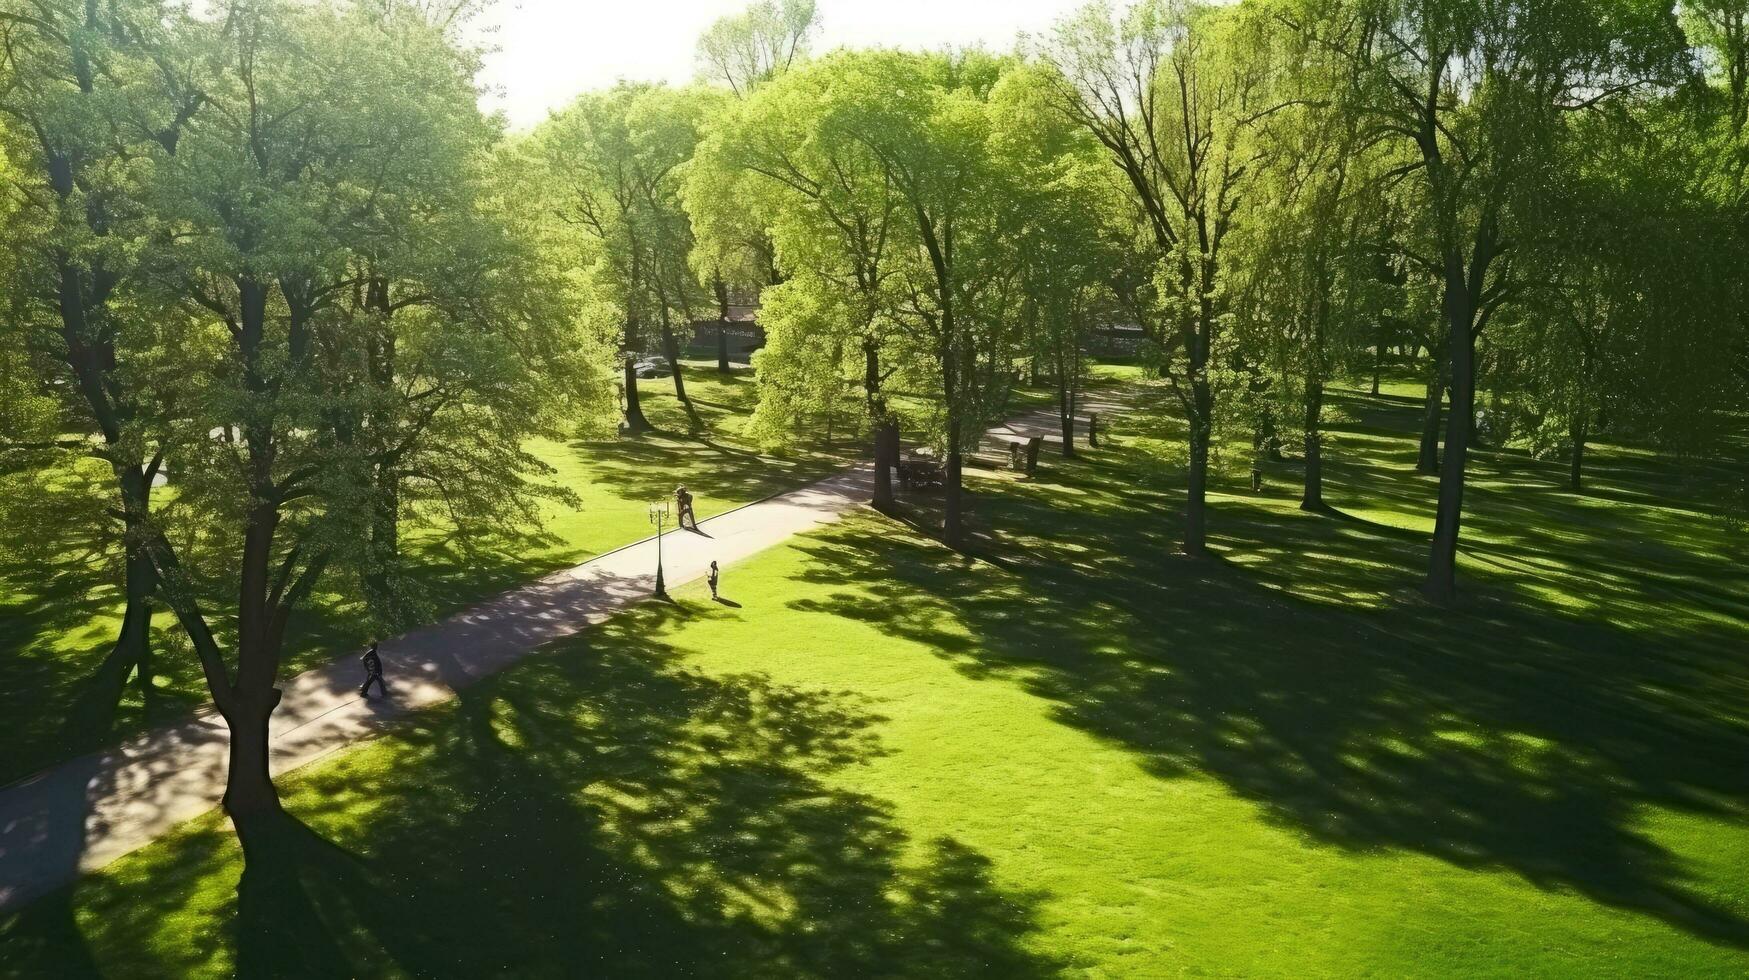 A sunny day in a city park with trees casting shade on a green lawn captured from above photo